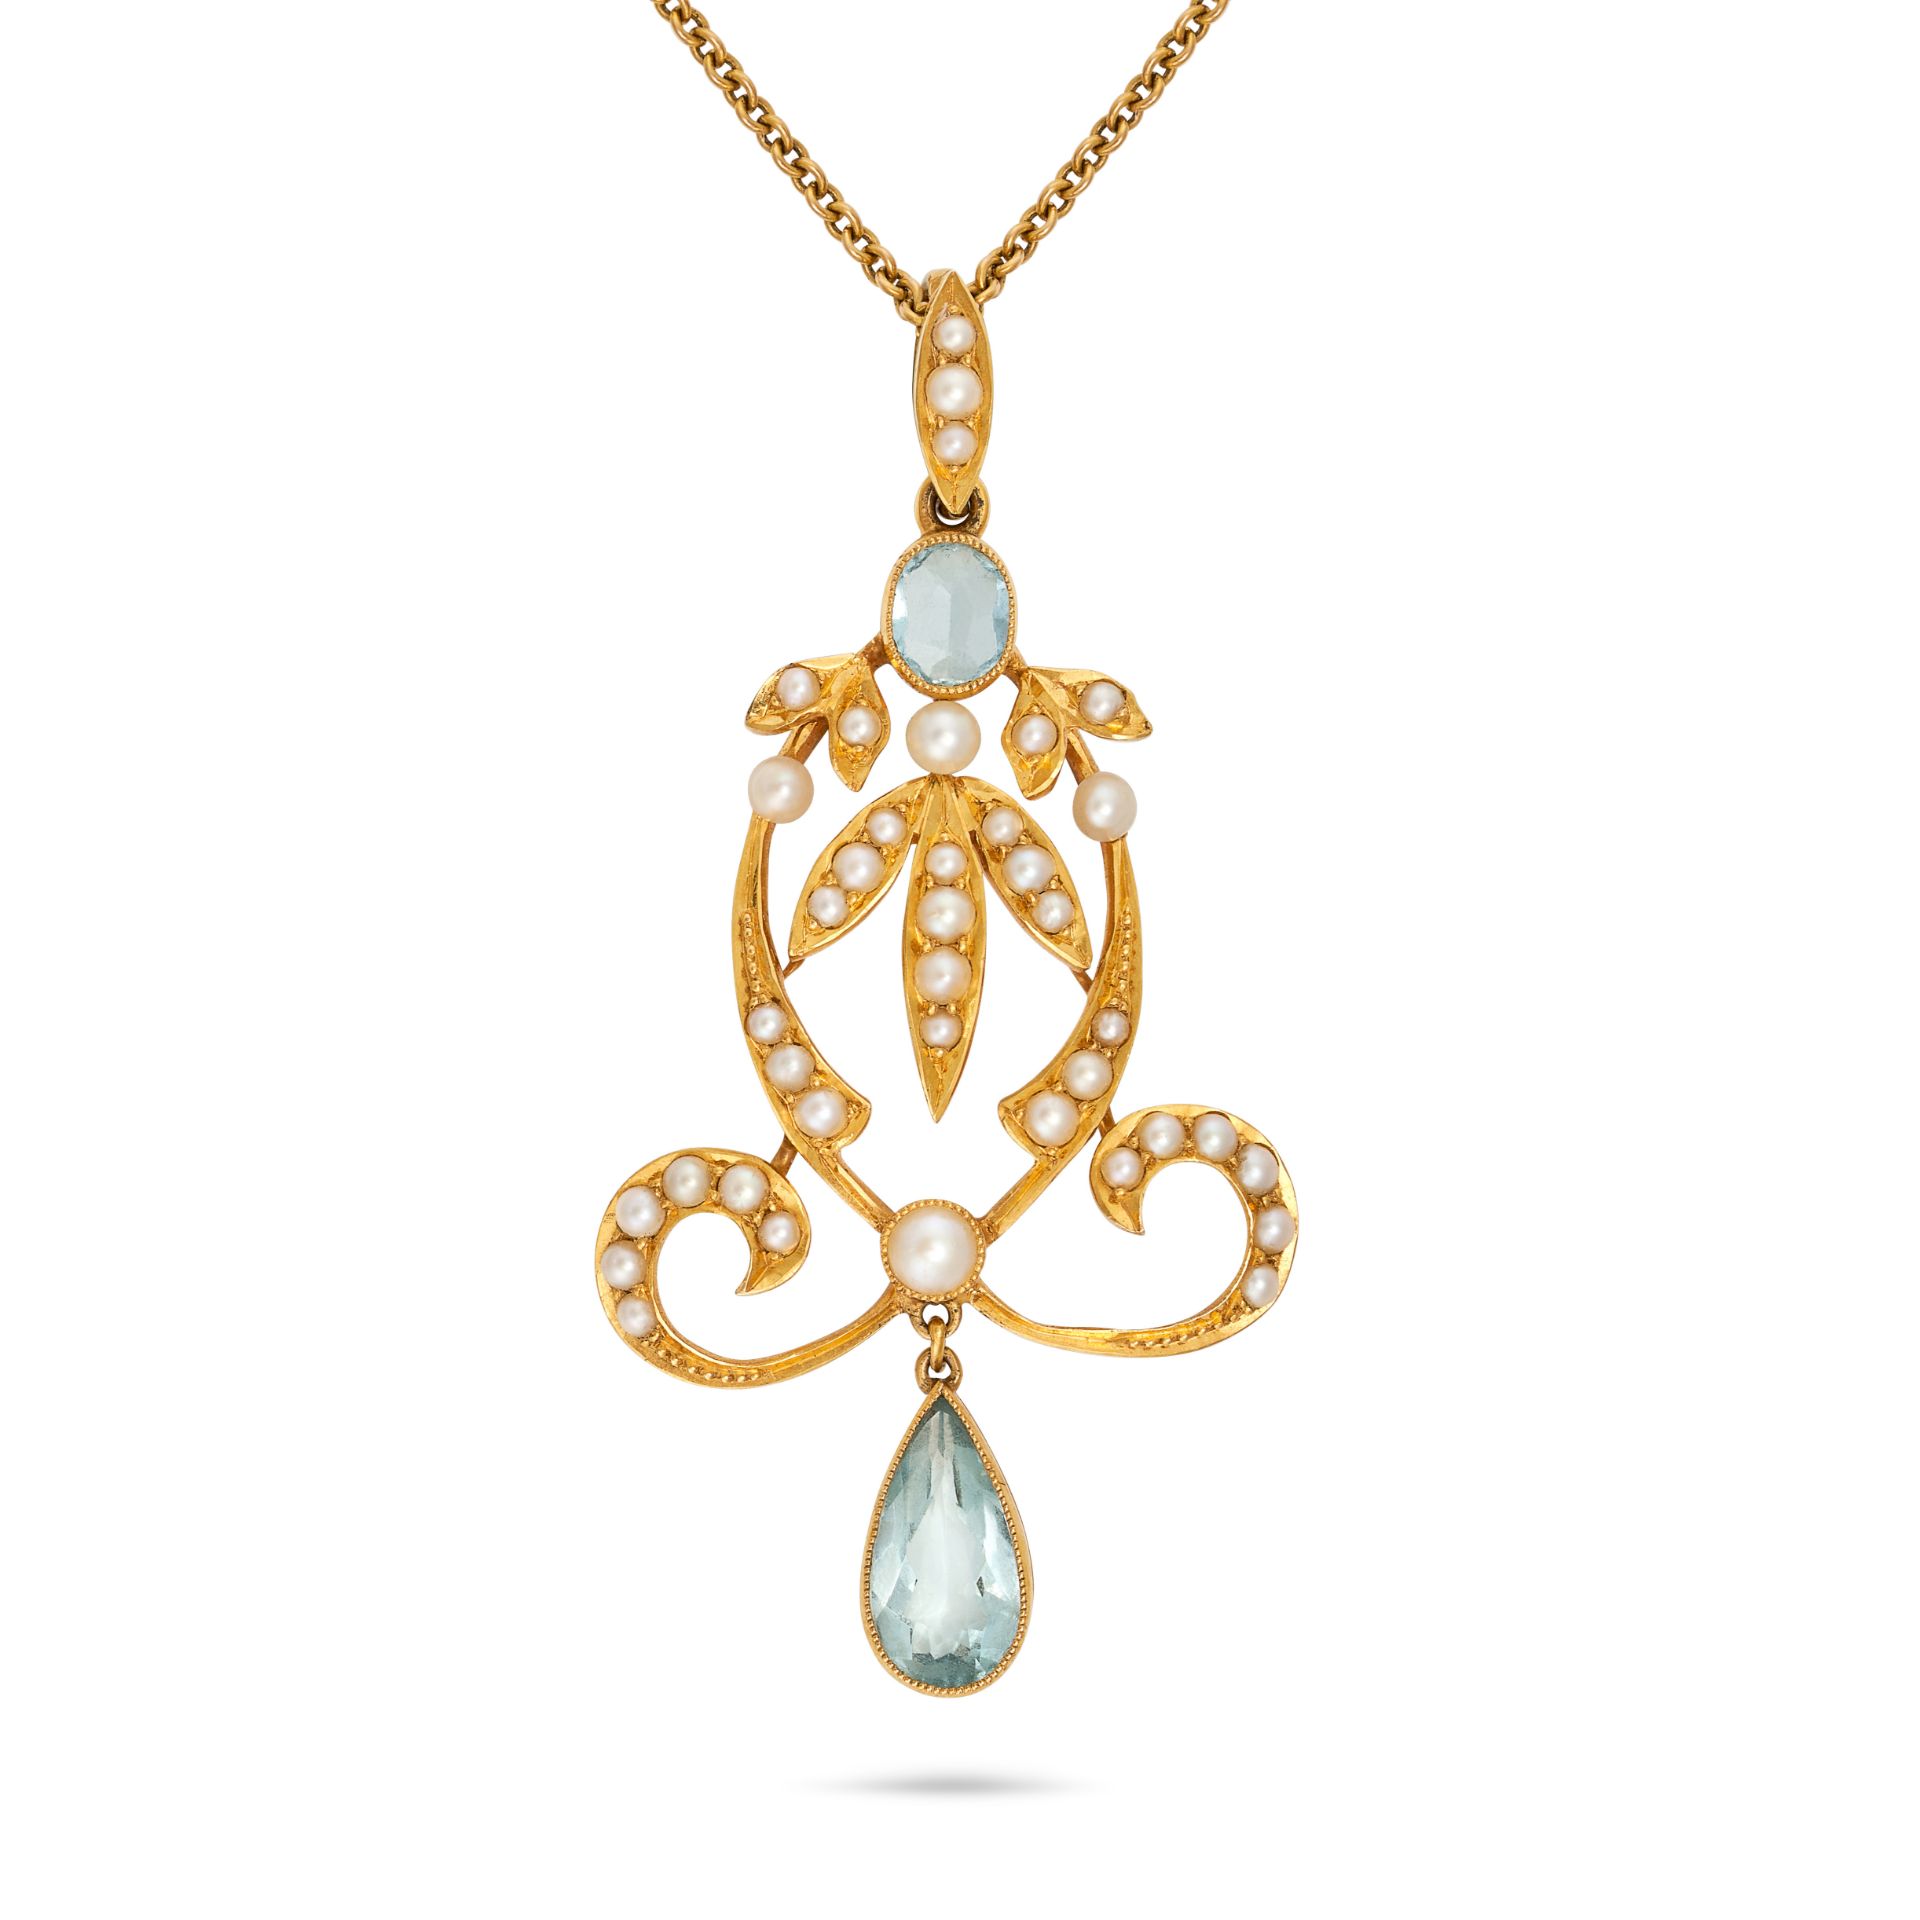 NO RESERVE - AN ANTIQUE EDWARDIAN AQUAMARINE AND PEARL PENDANT NECKLACE in yellow gold, the scrol...